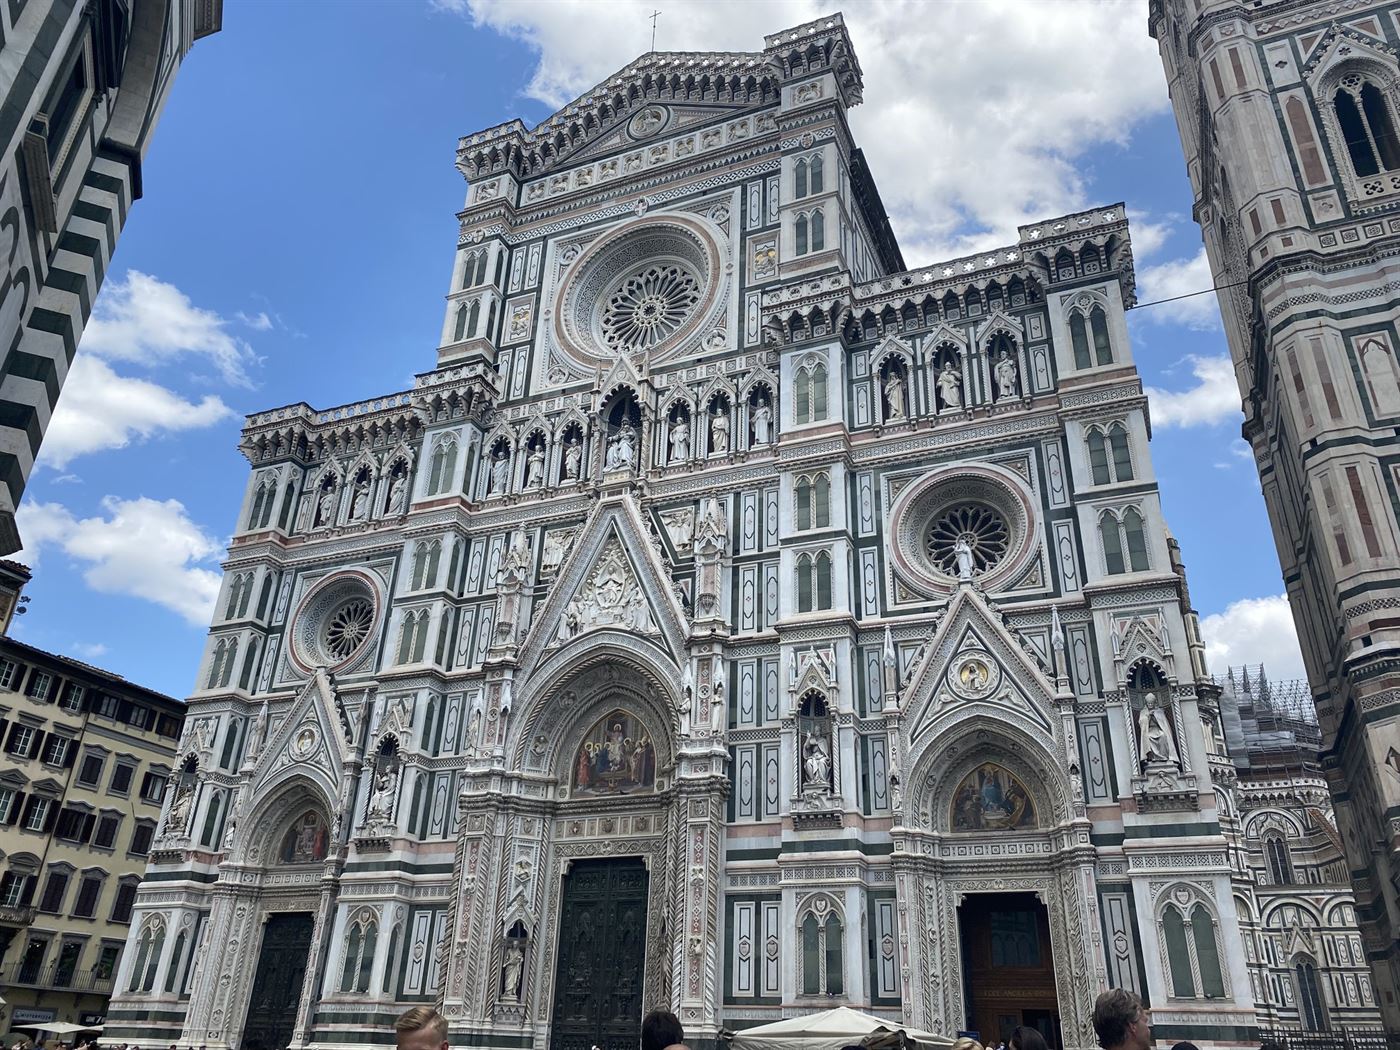 One of the most beautiful buildings Qiana Archer got to visit in Italy, the Cathedral of Santa Maria del Fiore. Photo courtesy of Qiana Archer